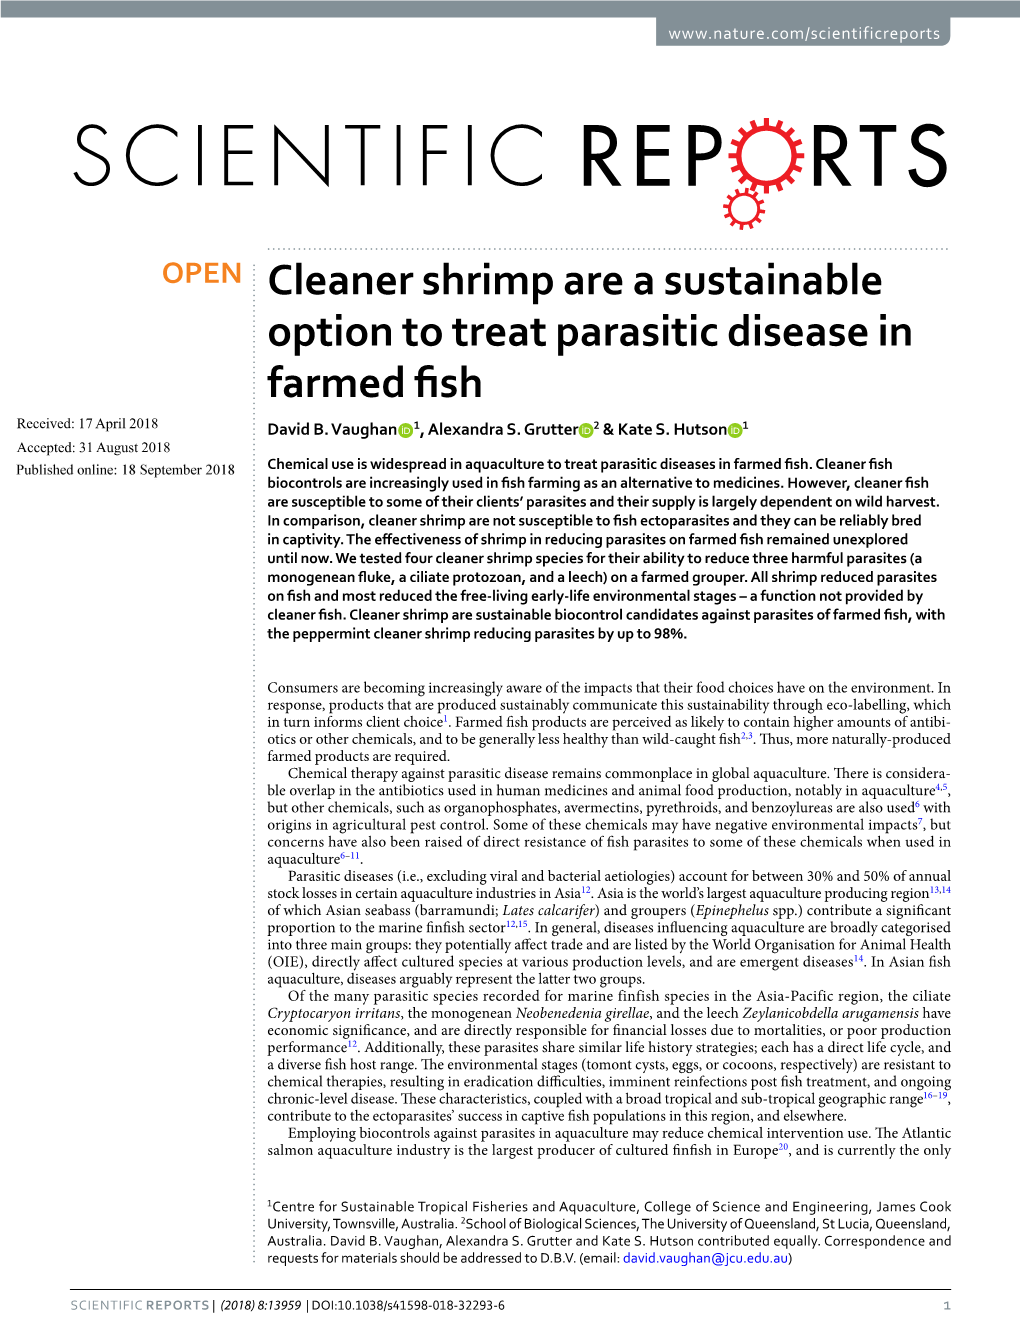 Cleaner Shrimp Are a Sustainable Option to Treat Parasitic Disease in Farmed Fsh Received: 17 April 2018 David B